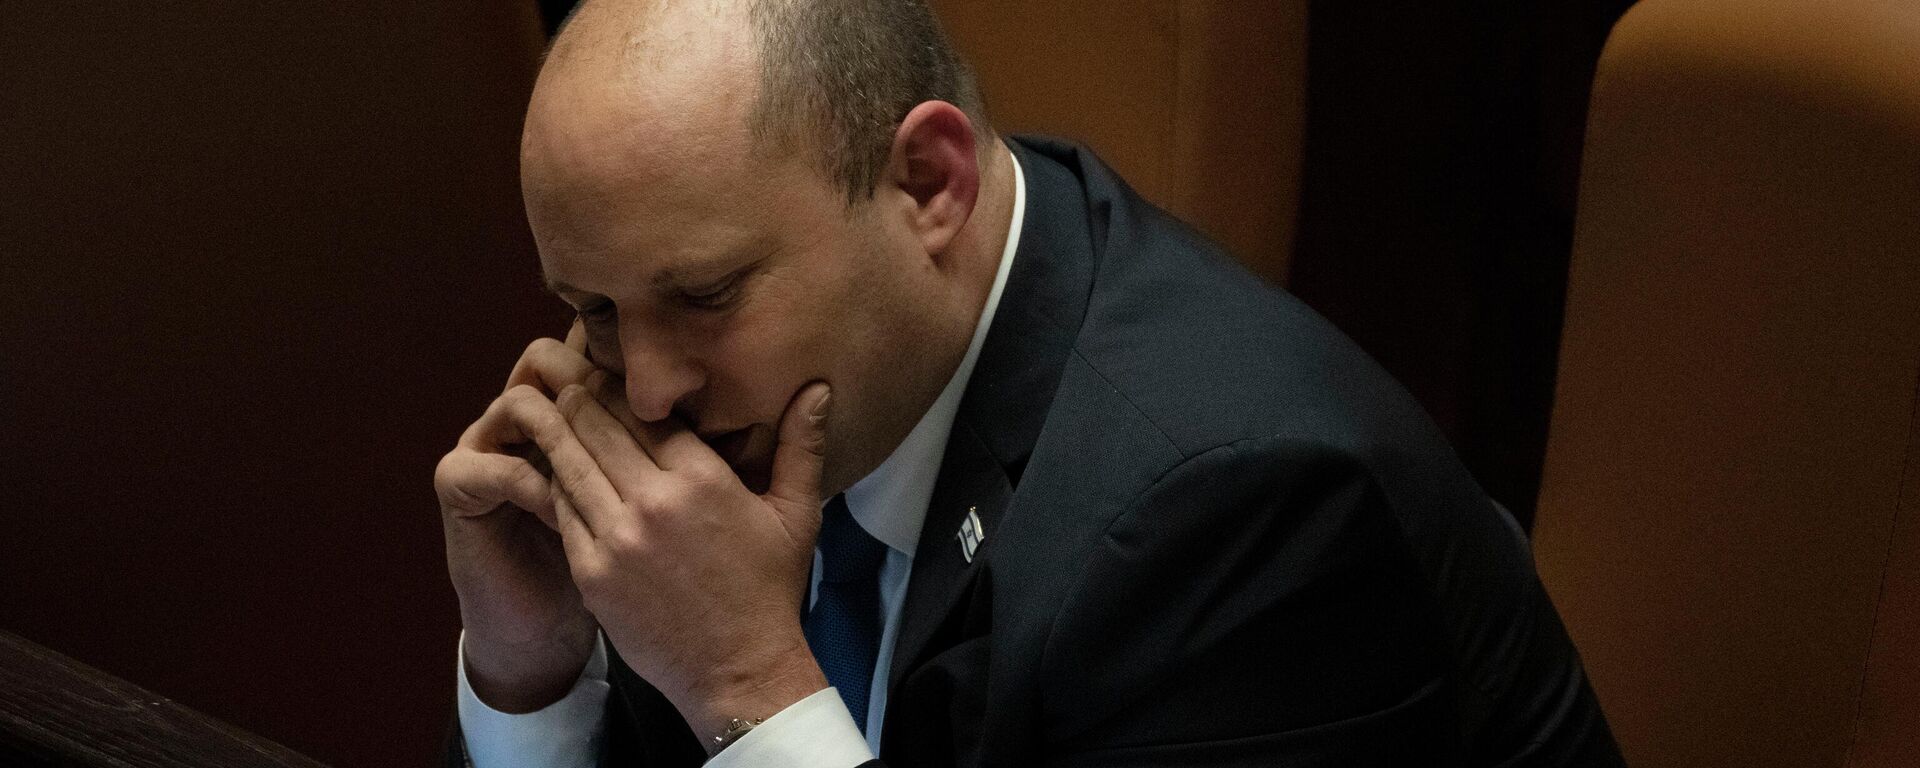 Israeli Prime Minister Naftali Bennett makes a call before voting on a law on the legal status of Jewish settlers in the occupied West Bank, during a session of the Knesset, Israel's parliament, in Jerusalem, Monday, June 6, 2022.  - Sputnik International, 1920, 13.06.2022